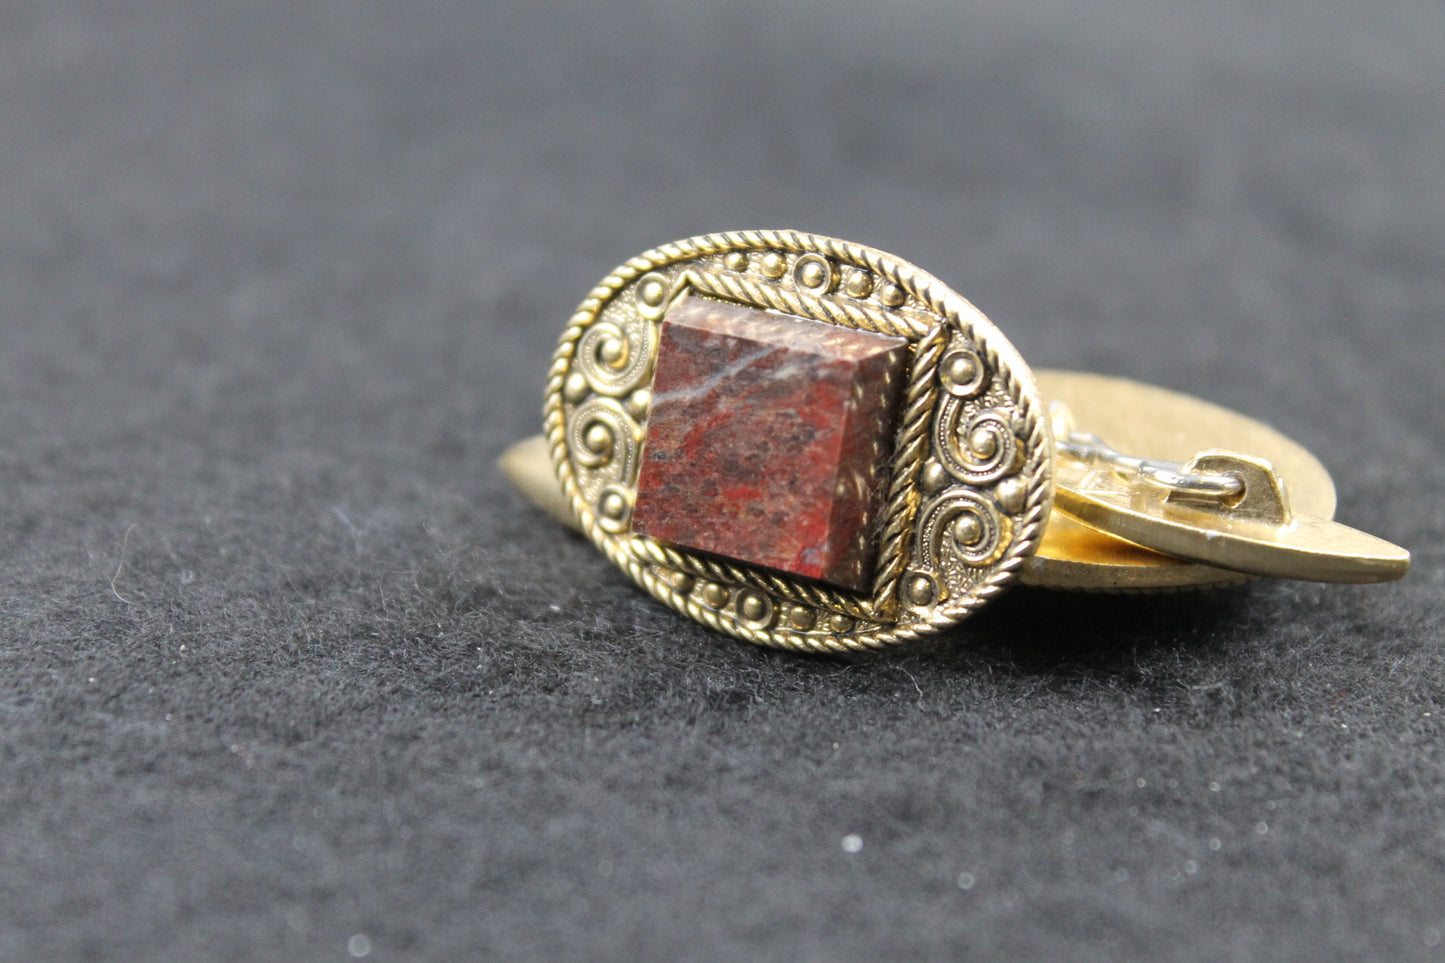 Vintage Oval Cufflinks with Square Brown Stone